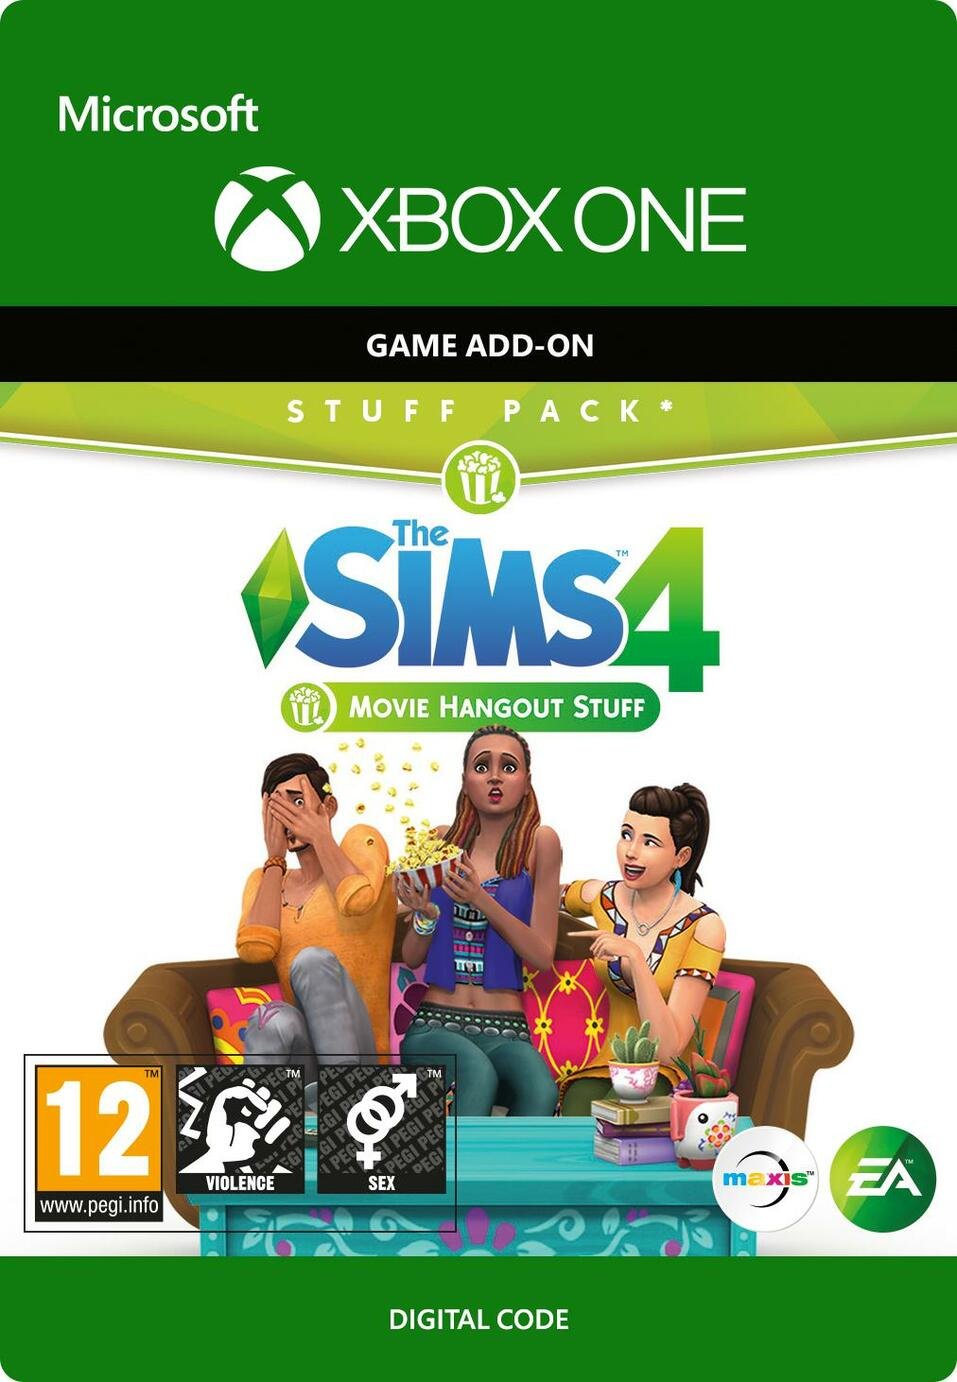 The Sims 4: Movie Hangout Stuff Xbox Game - Digital Download